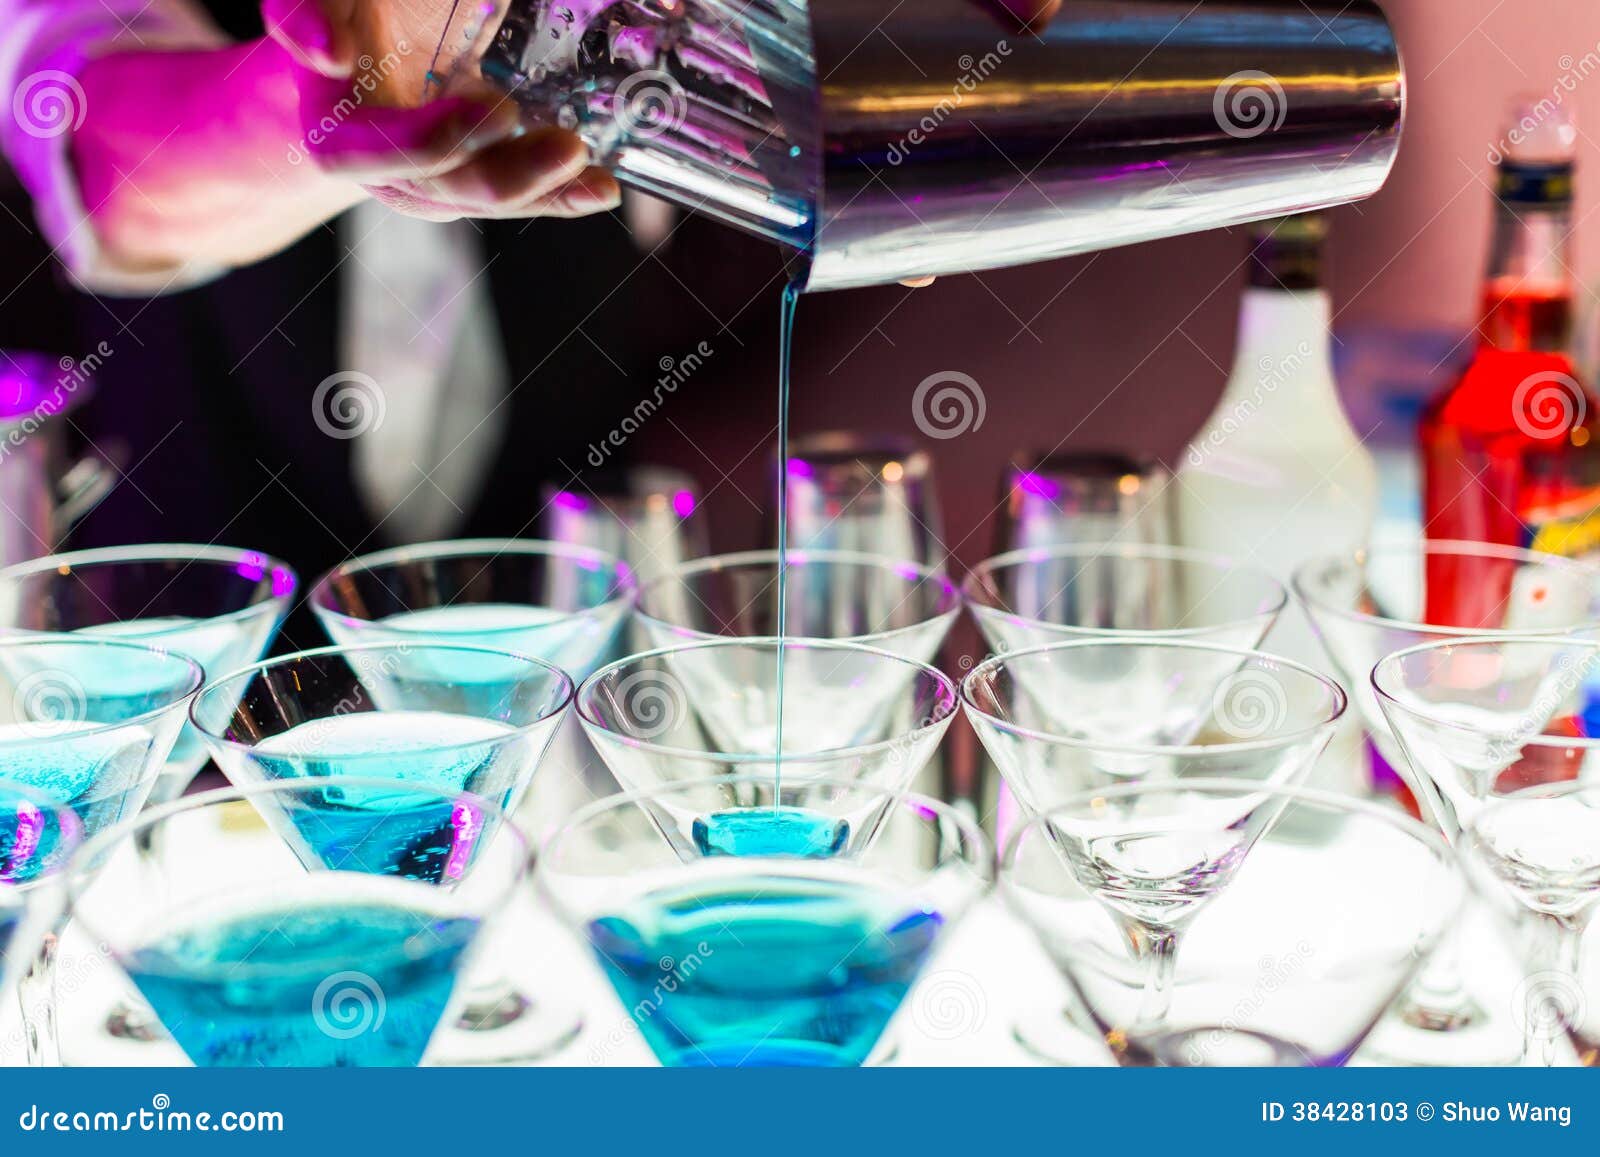 cocktail drinks